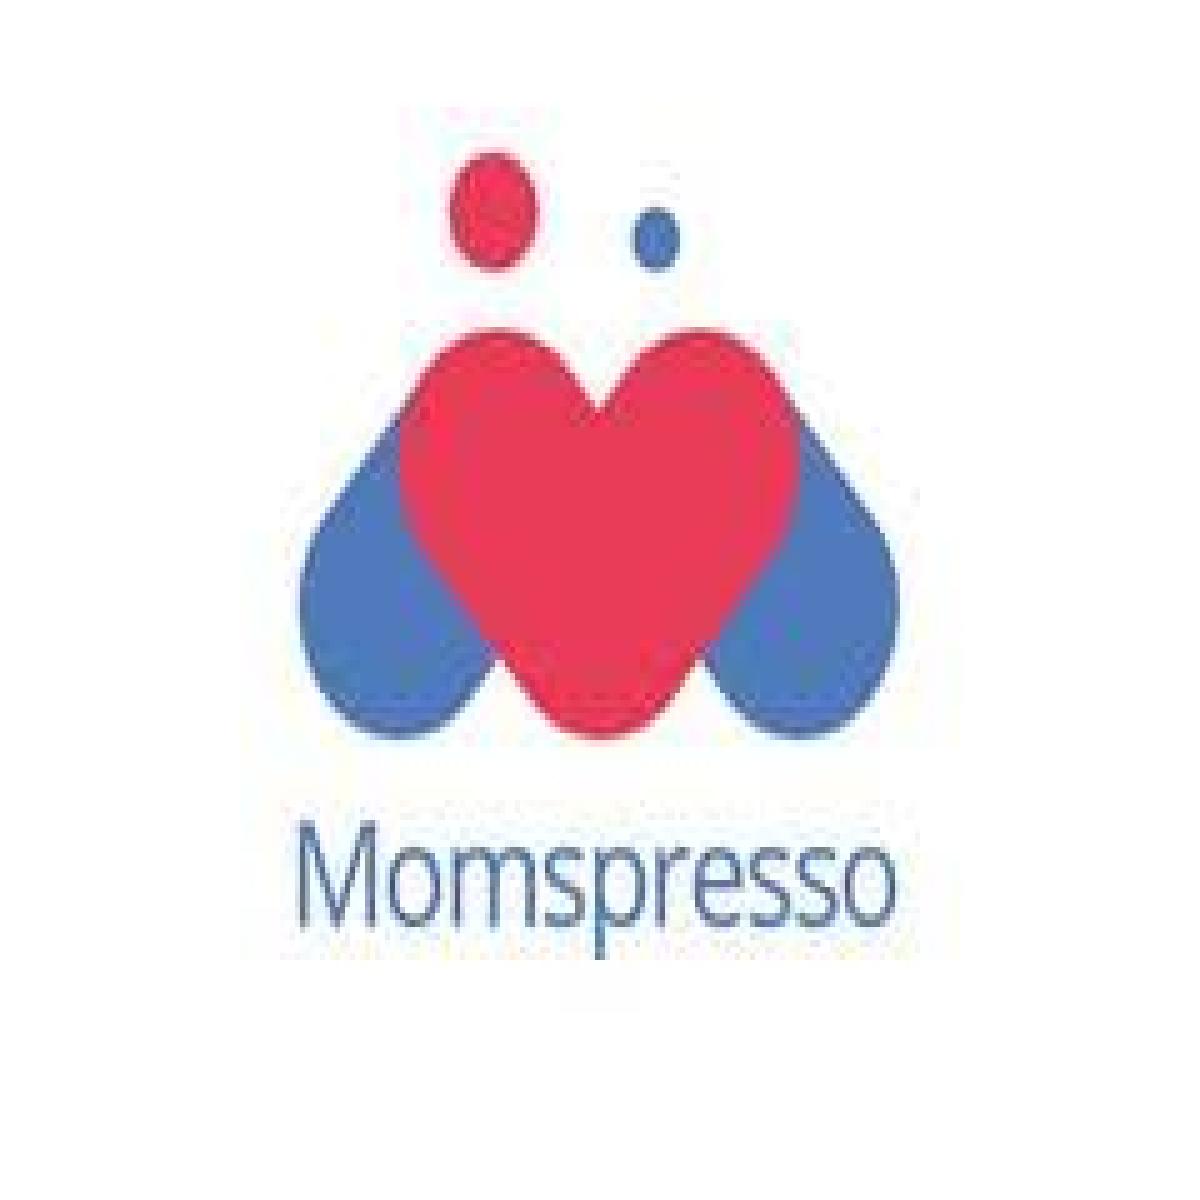 83 percent of Women Have Visited a Doctor at Least Once to Rule out Heart Issues - Reveals Momspresso.com World Heart Day Survey